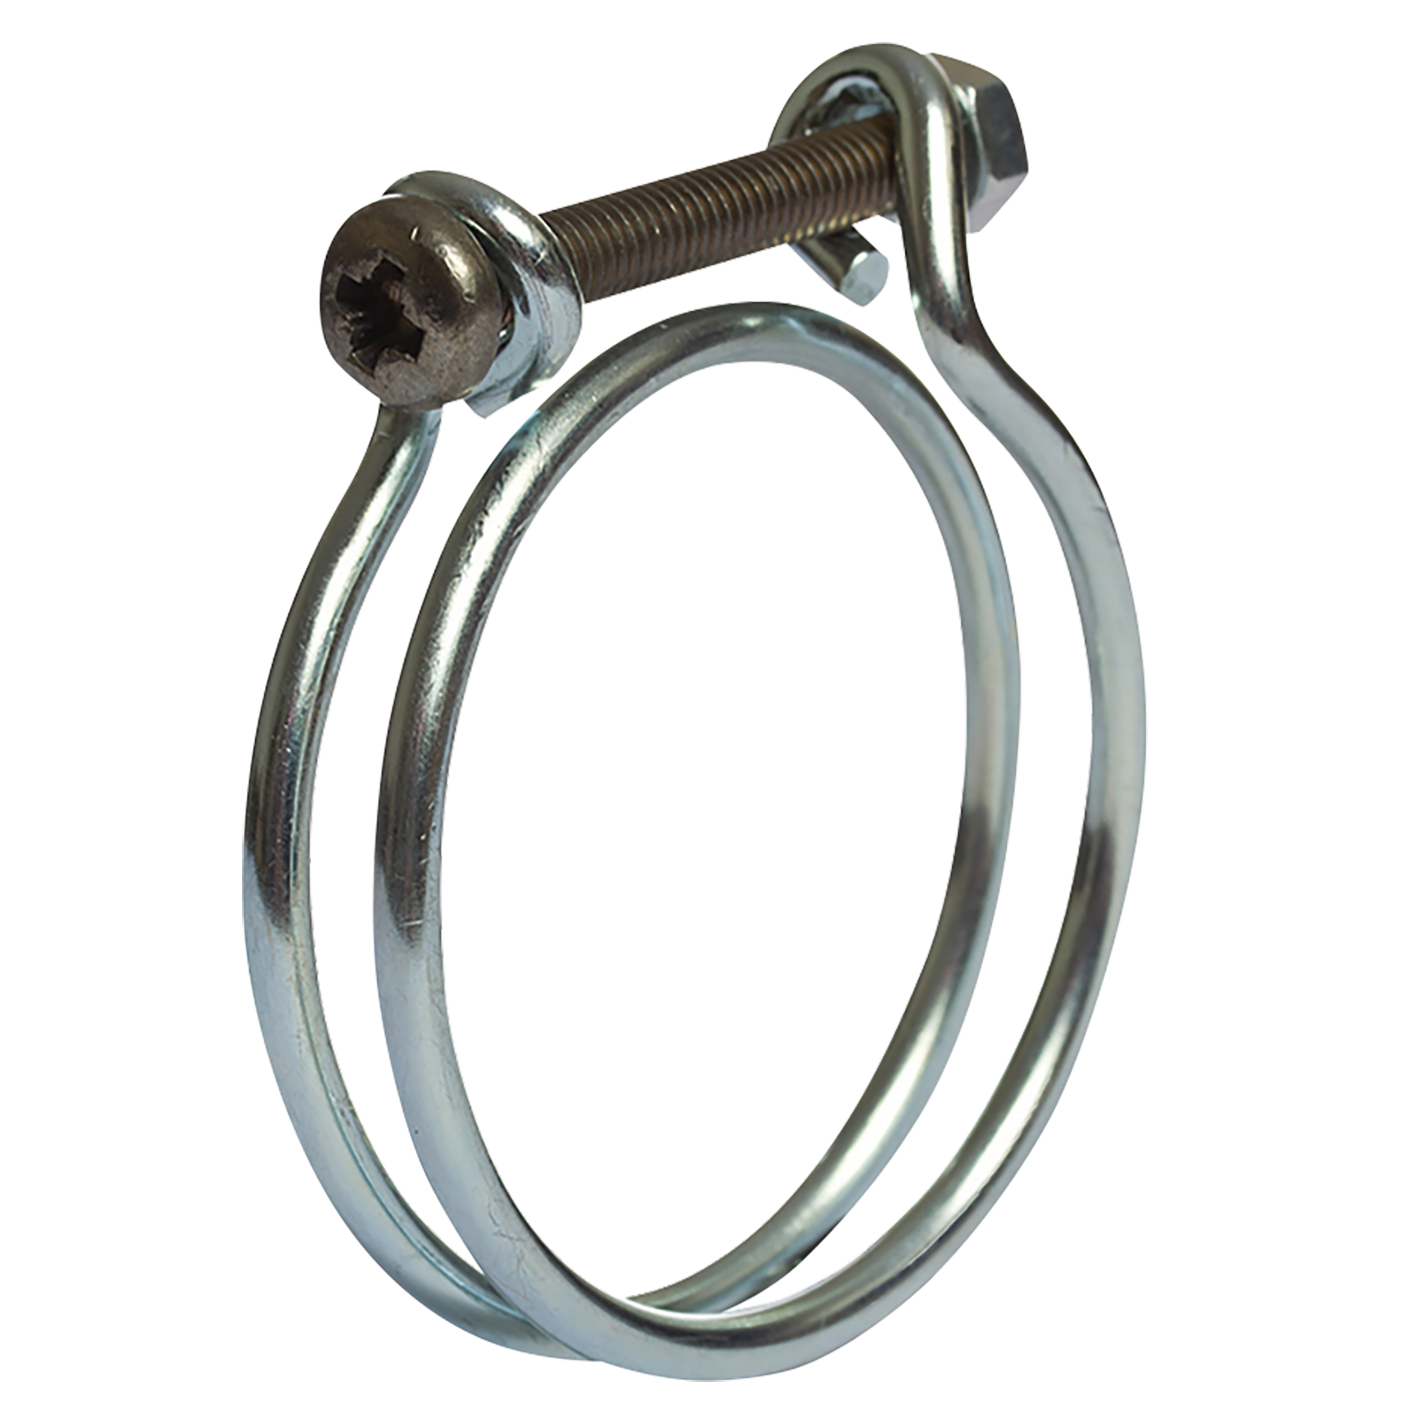 125MM ST/ST L/HAND SPIRAL WRAP CLAMP